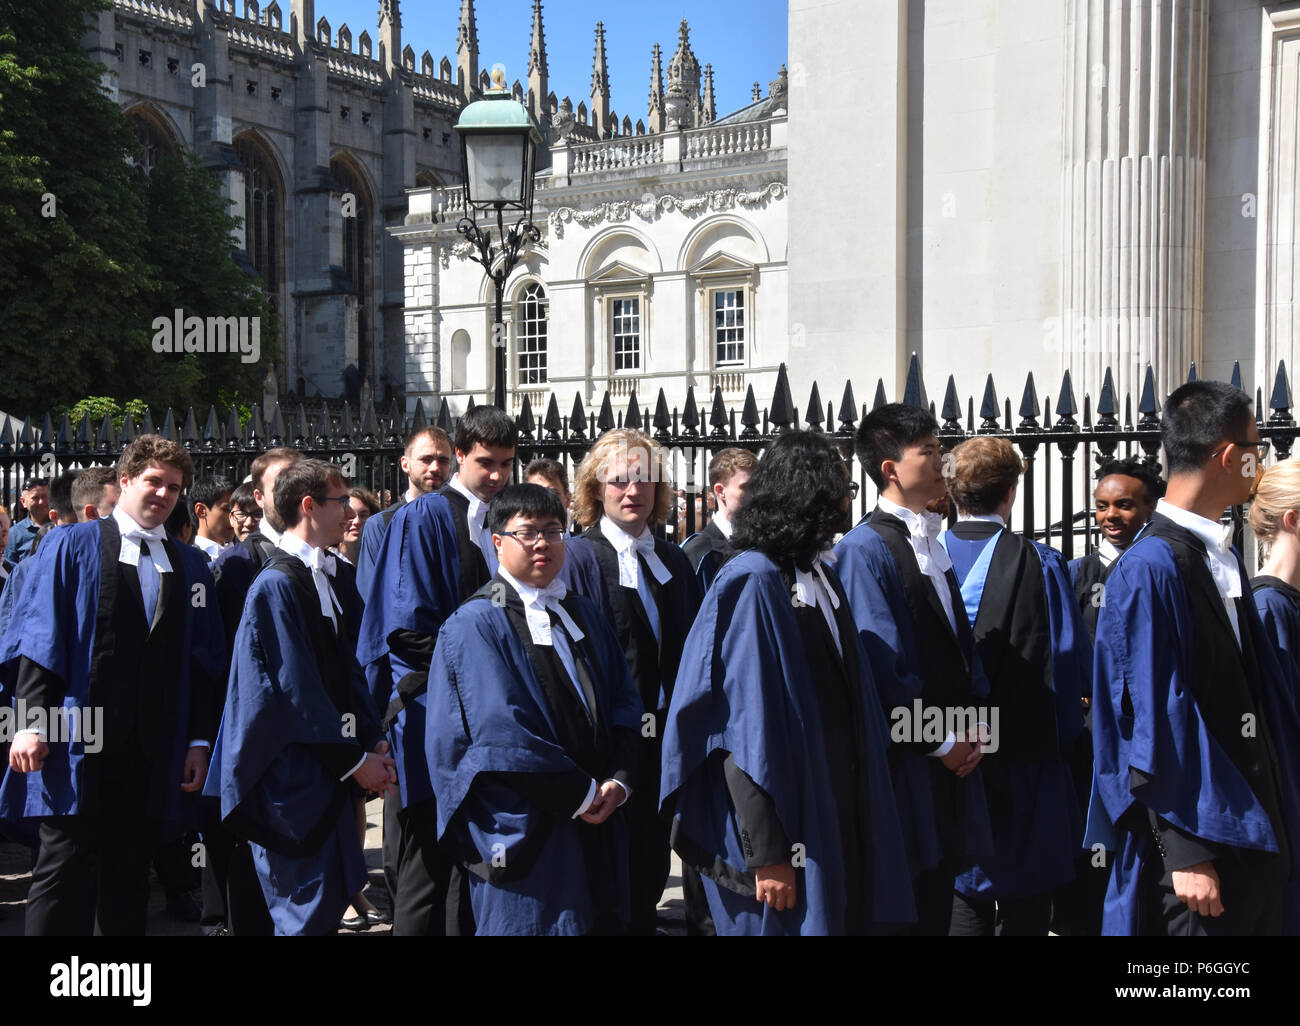 What kind of pictures do cambridge university students take?